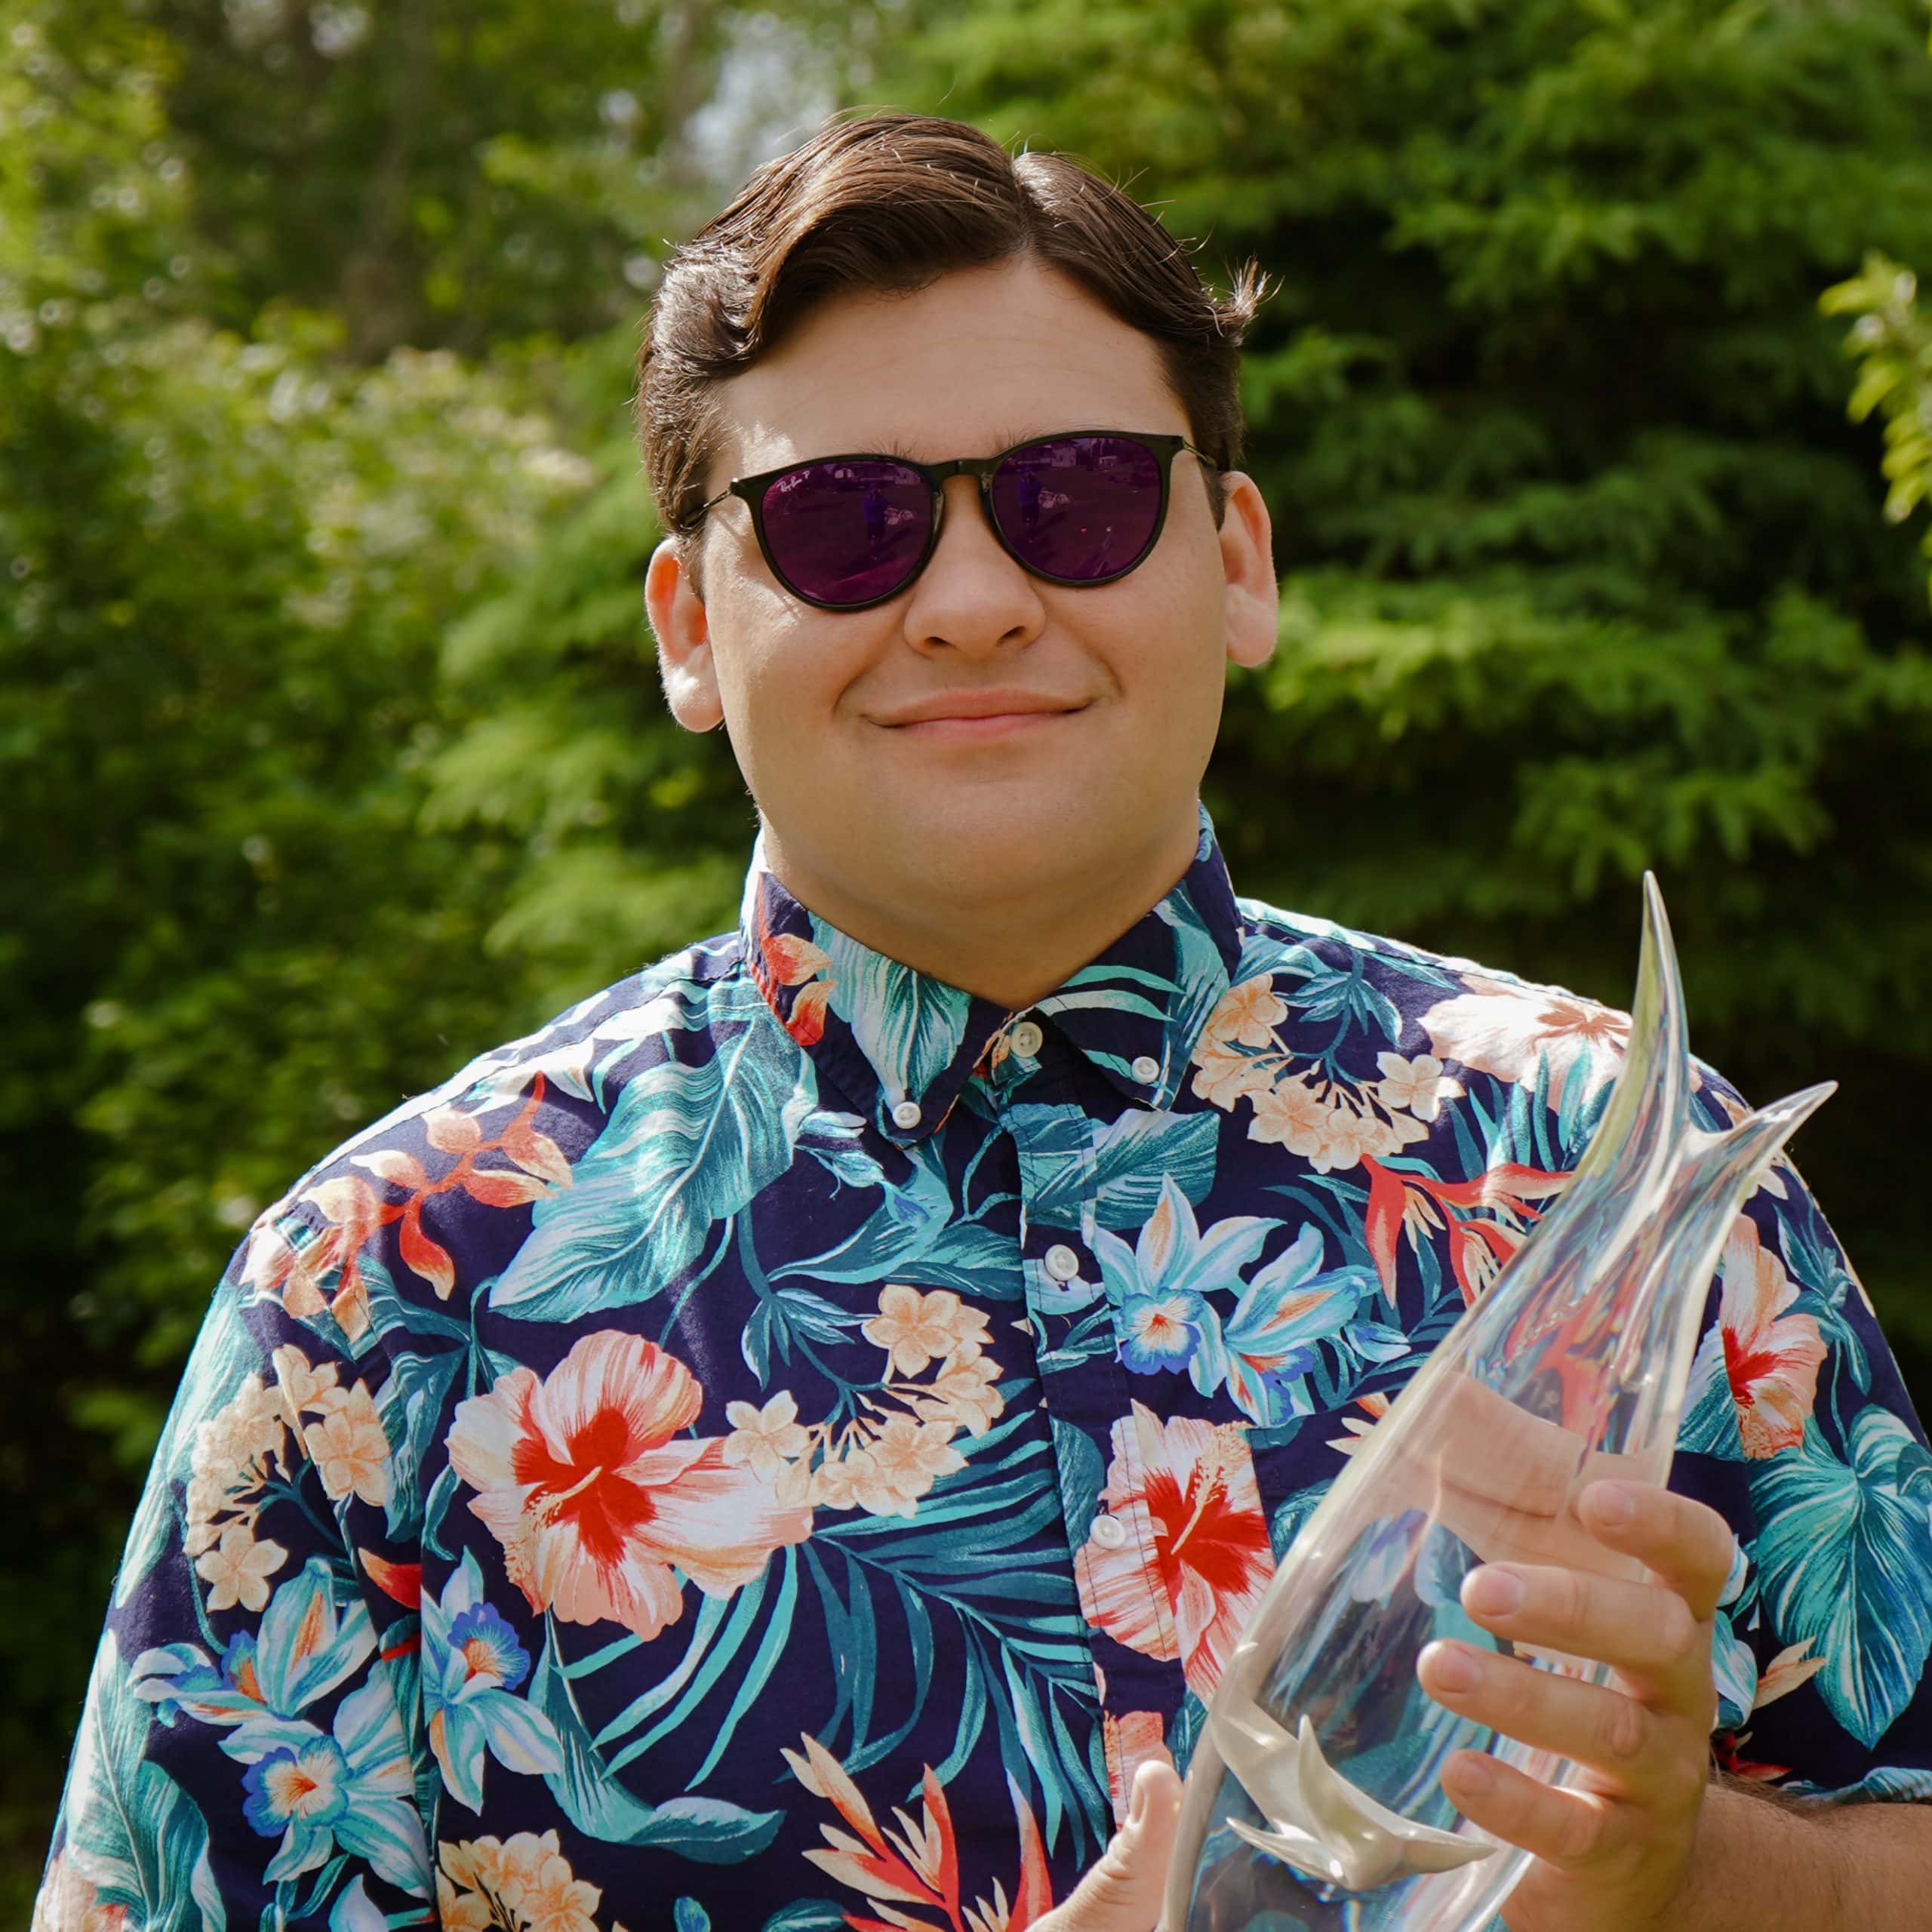 A young man with brown hair wearing a blue floral print shirt and sunglasses poses for a photo